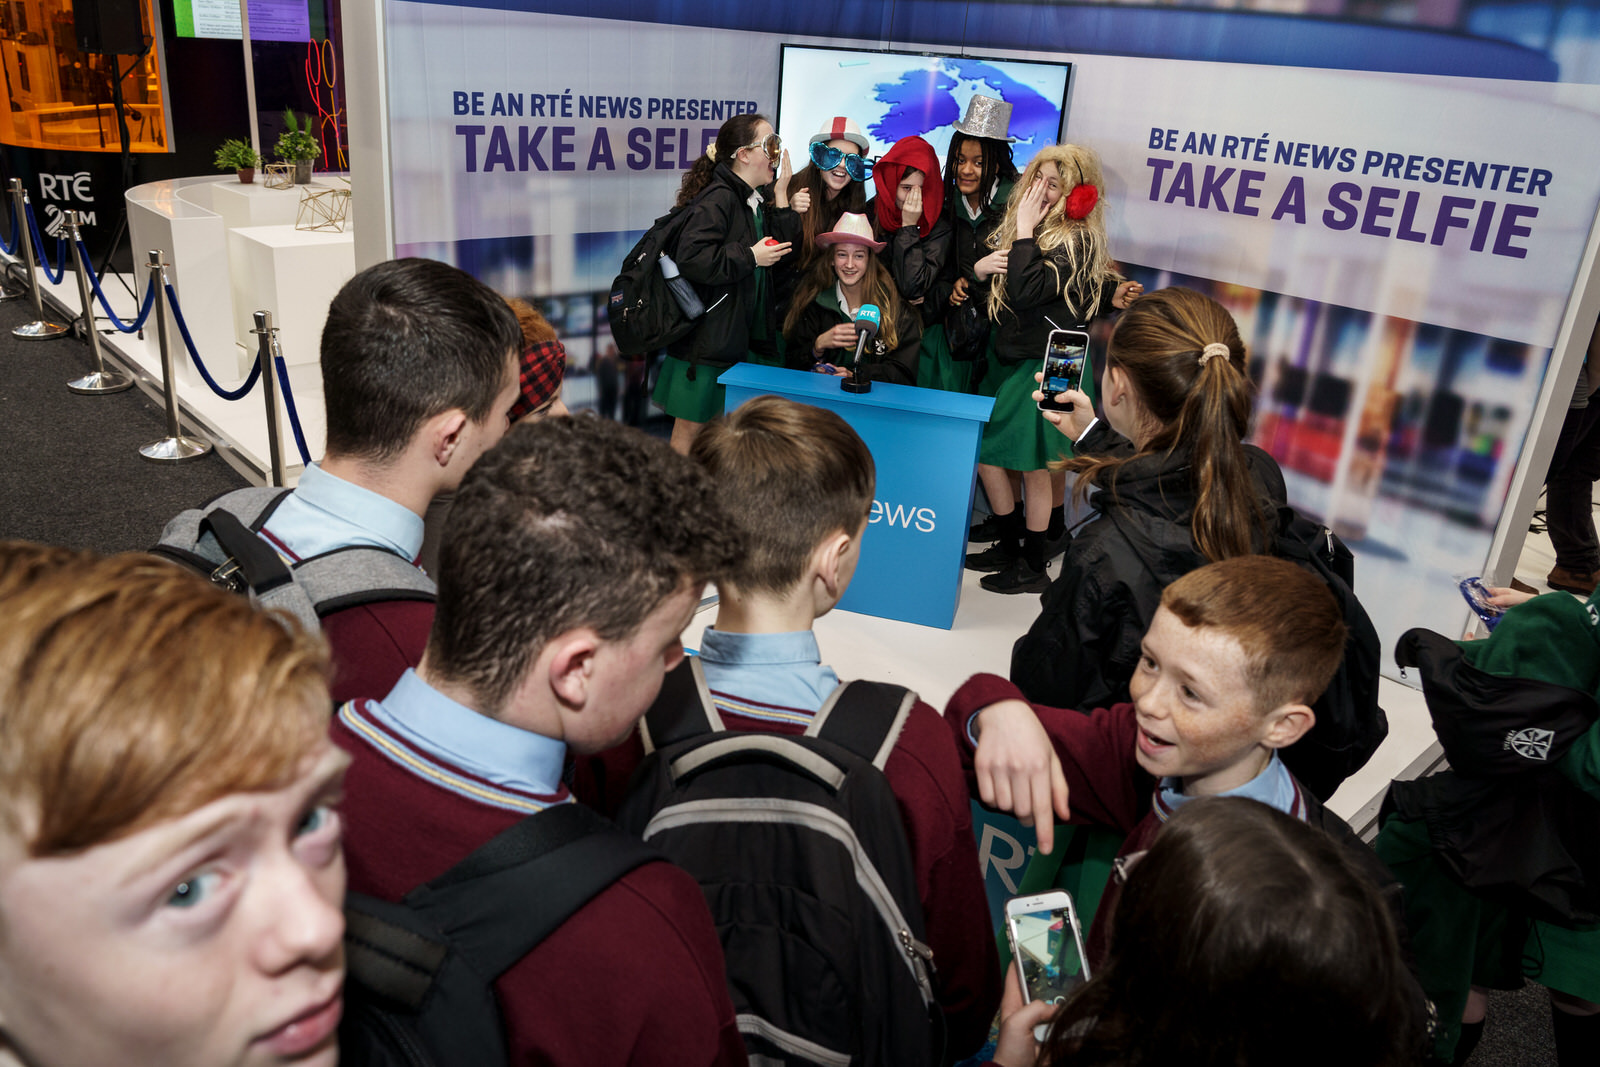  CISCO at BT Young Scientist and Technology Exhibition 2019 RDS Dublin Ireland. 